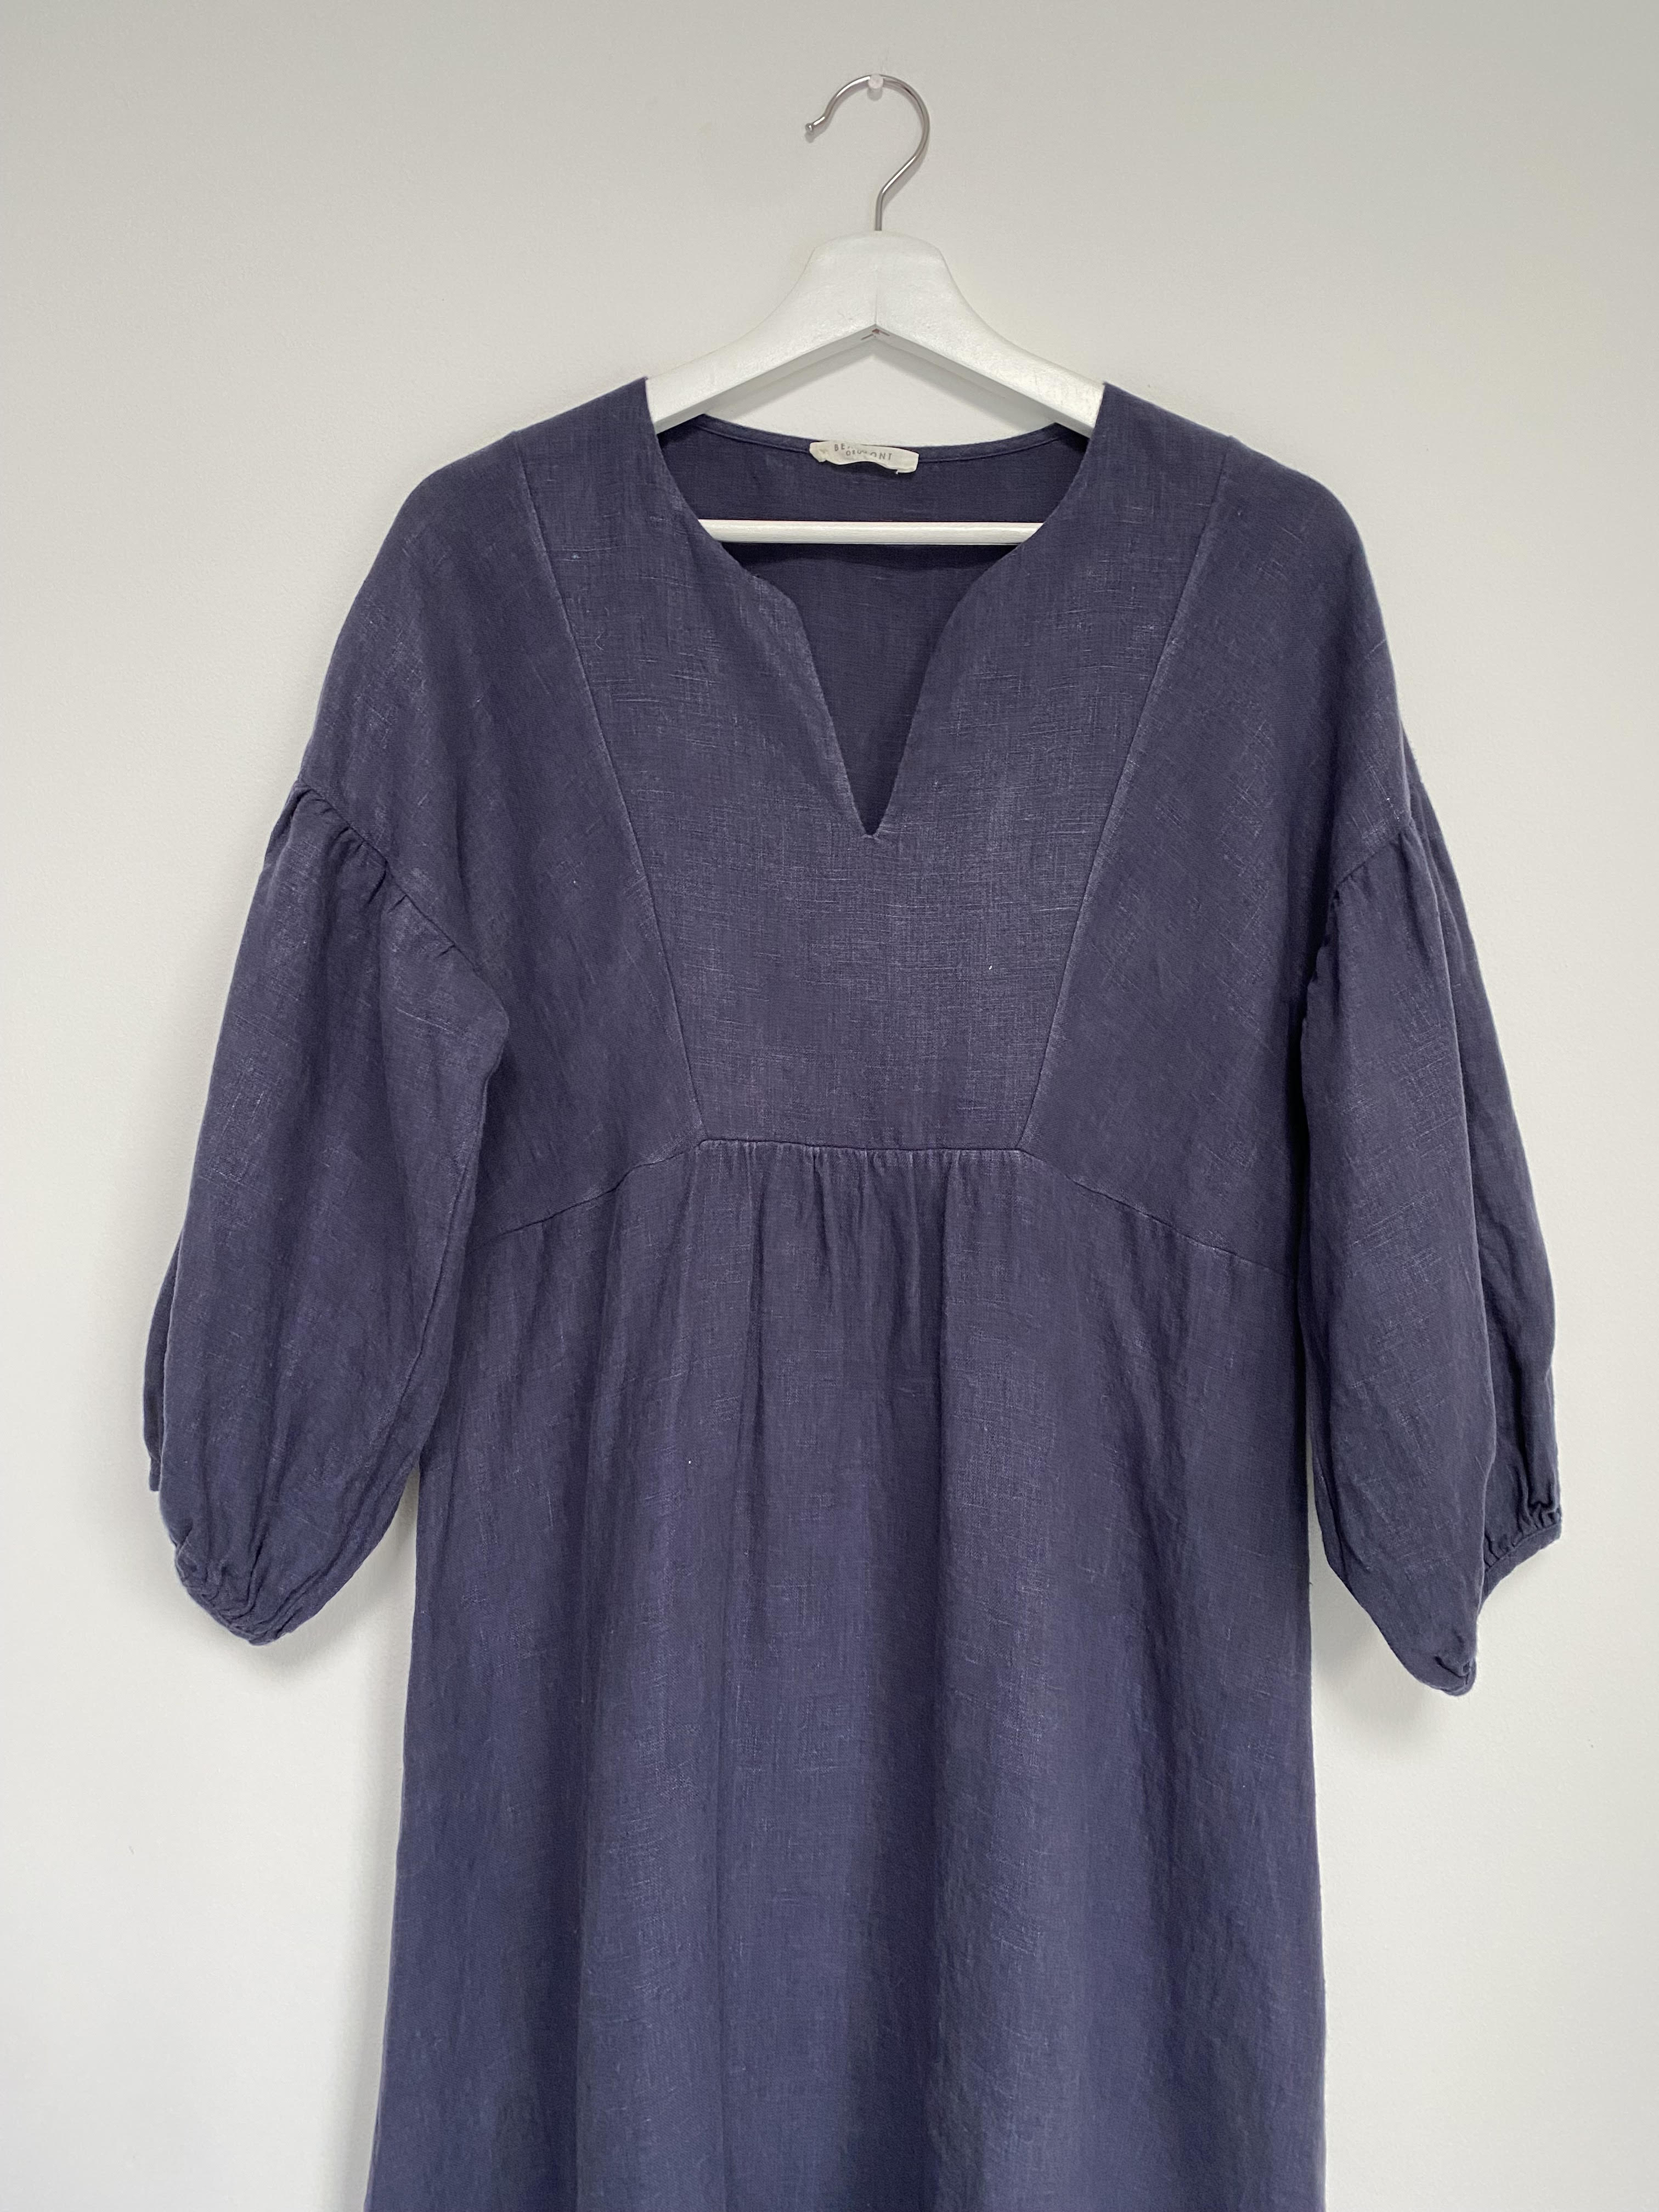 Andreia-May Dress In Midnight Size S